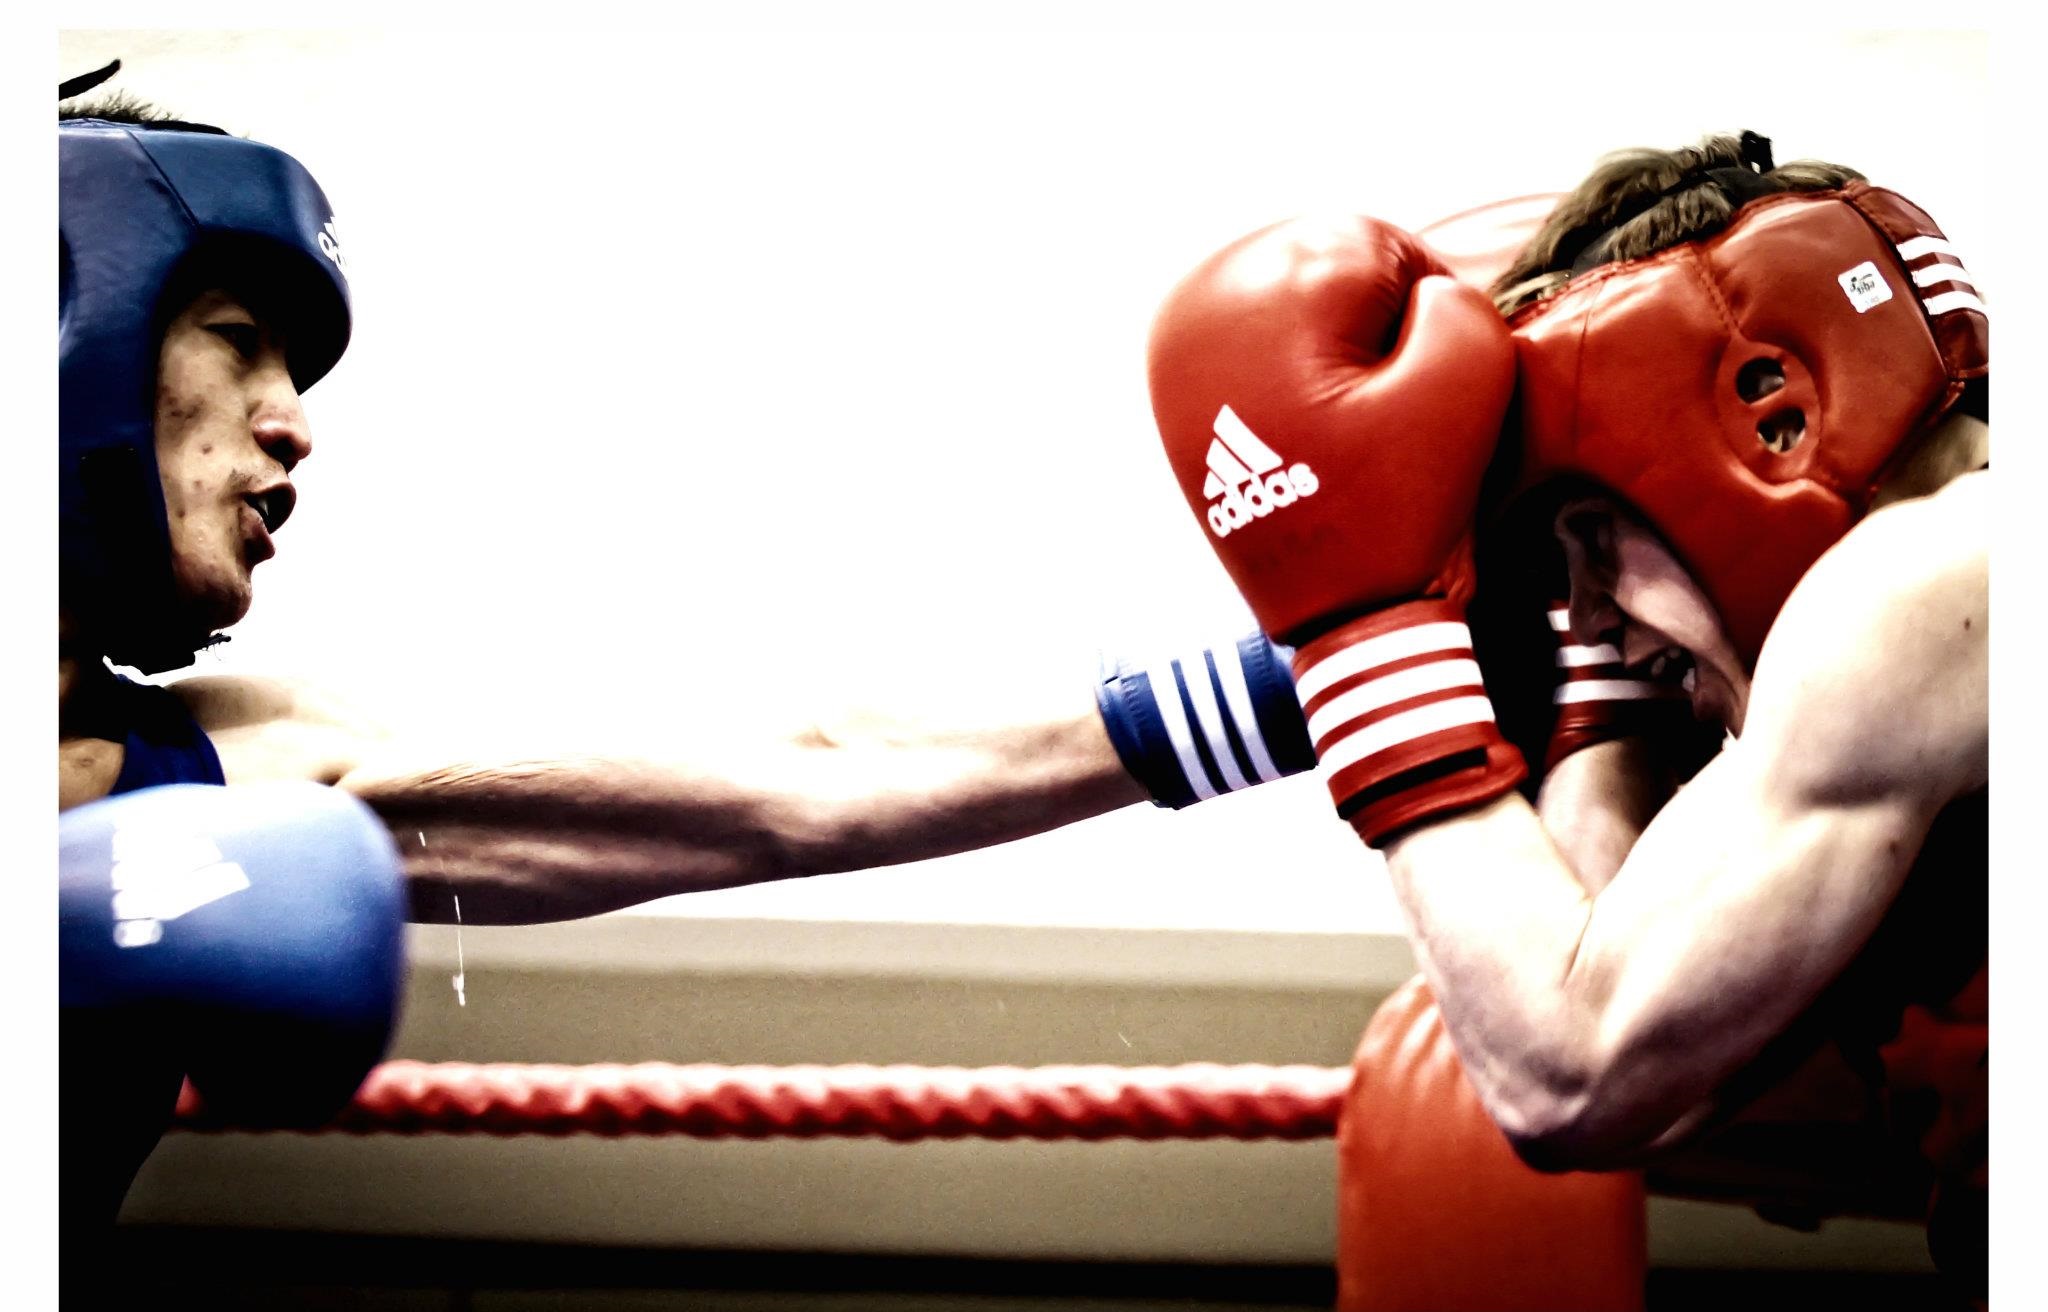 Full Hd Widescreen Boxing, Isaac Crooks - Olympic Boxing , HD Wallpaper & Backgrounds